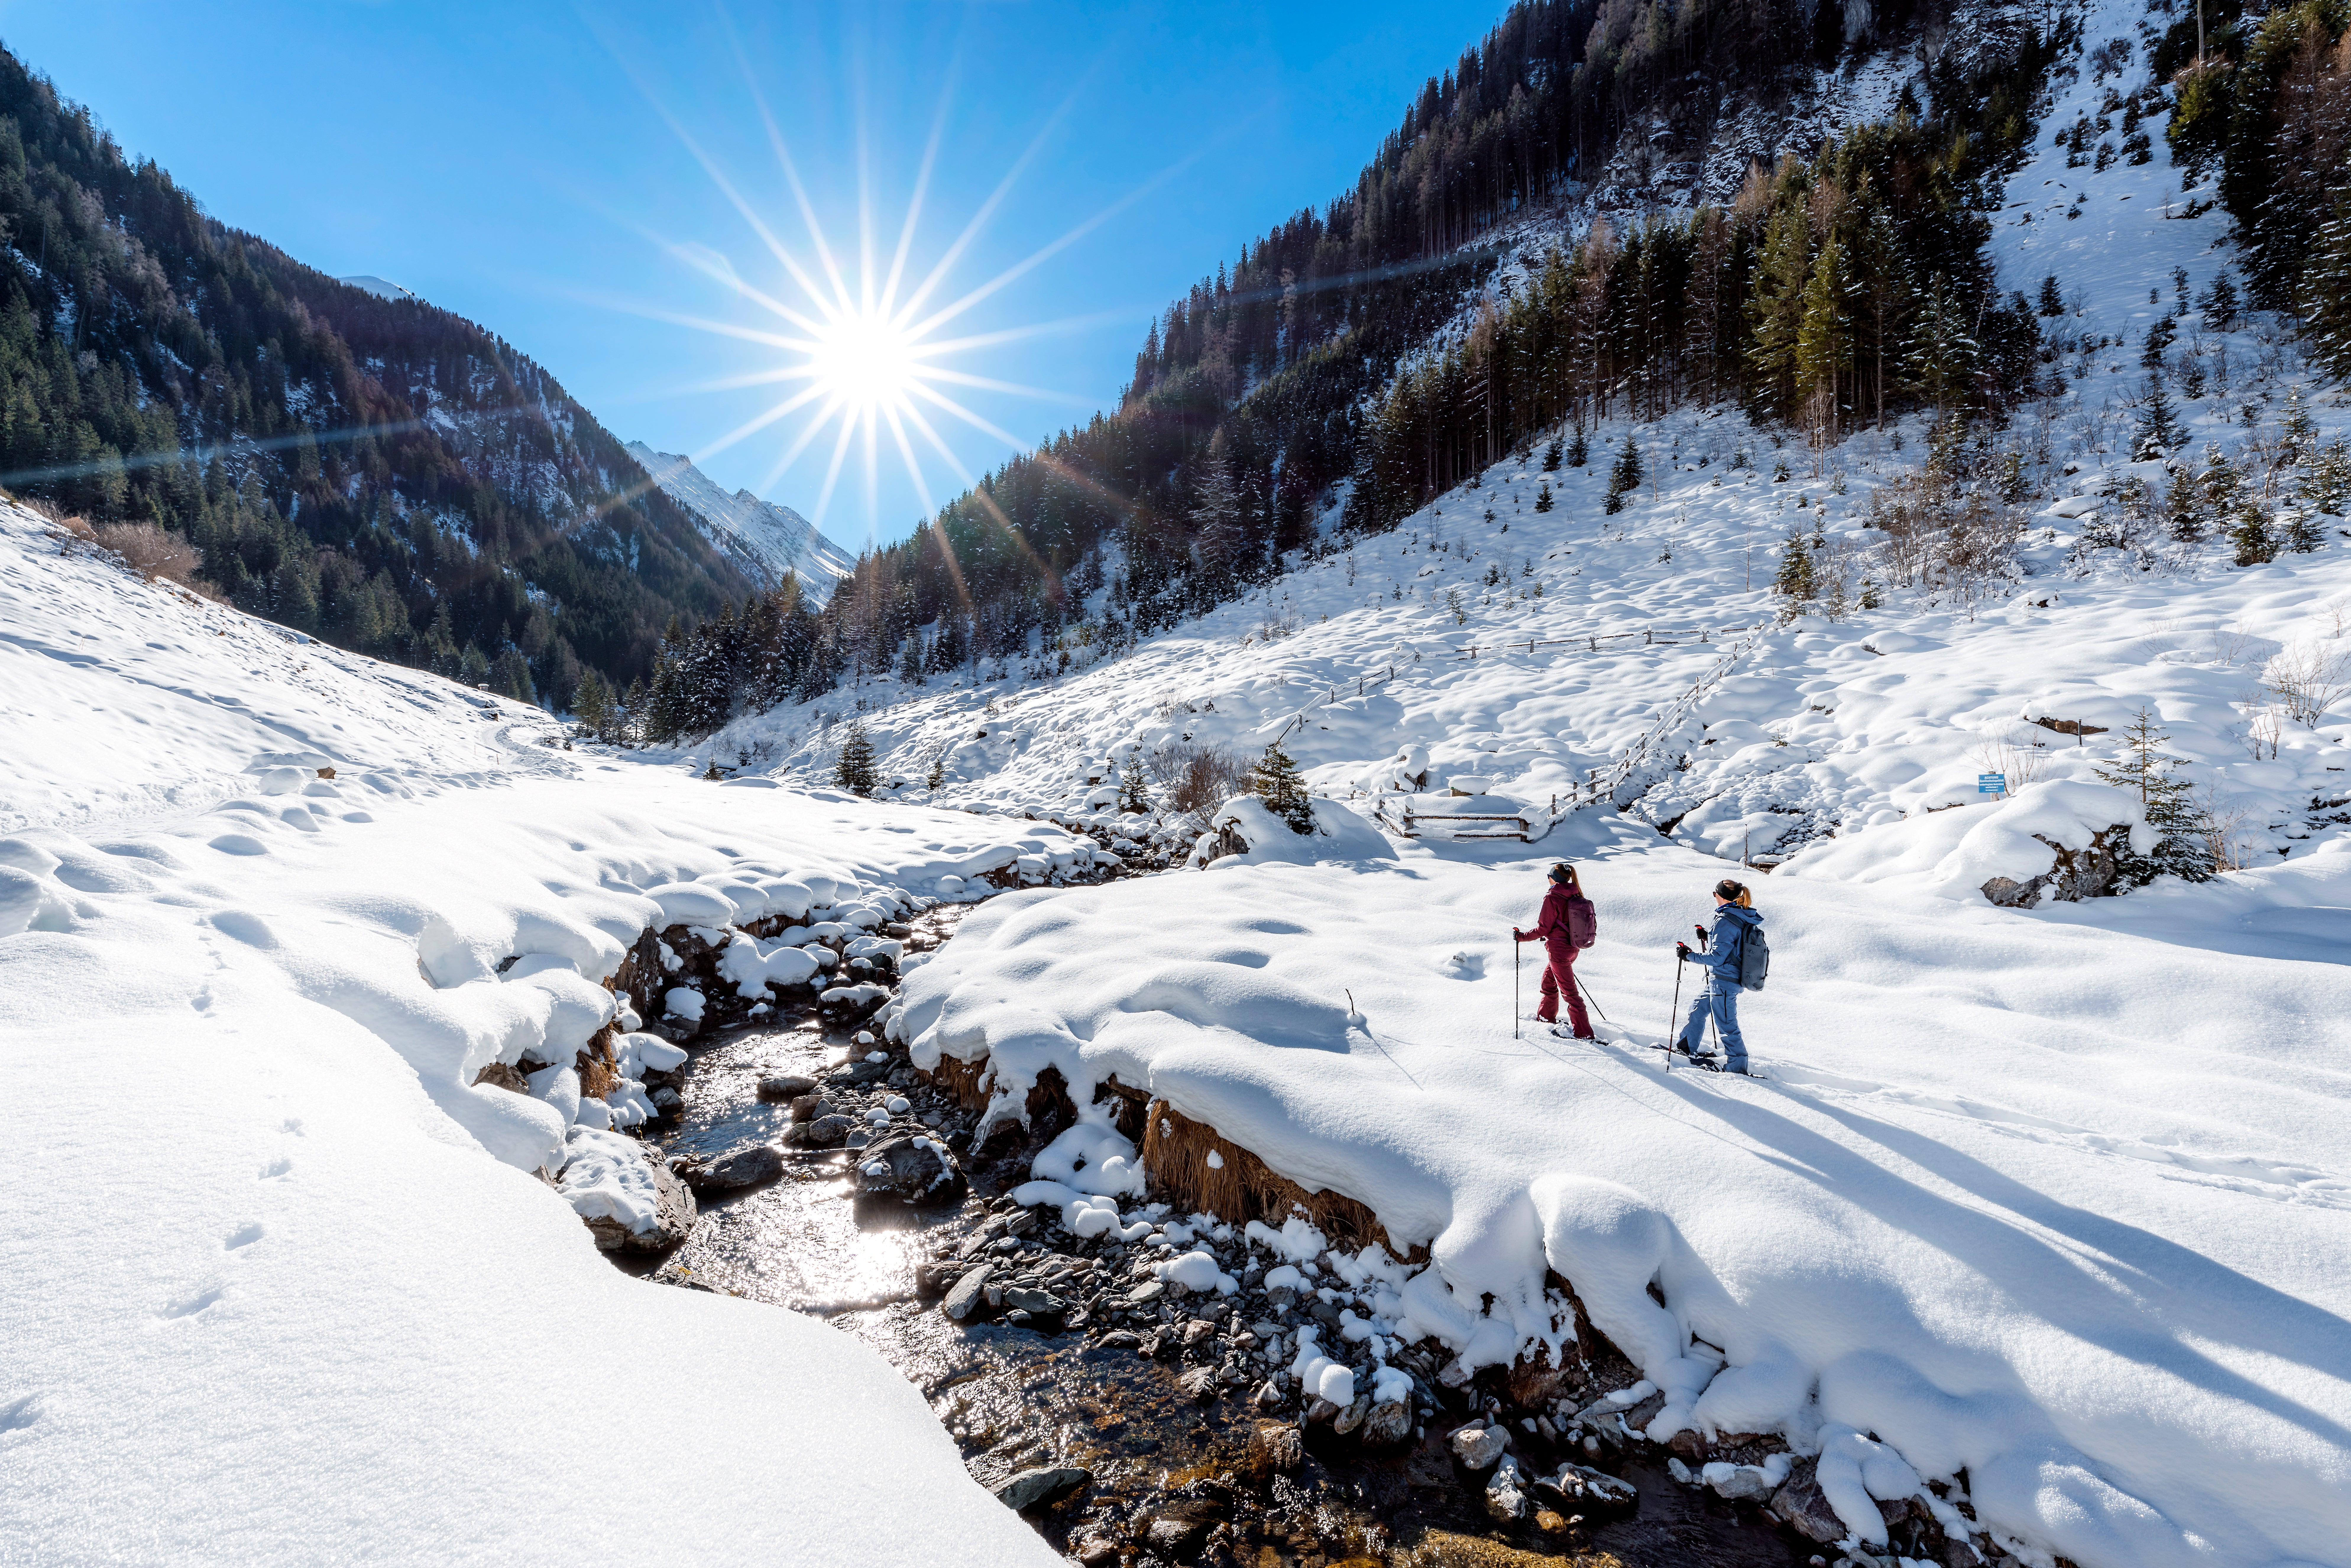 Swap your skis for snowshoes to enjoy a breathtaking hike around Zillertal